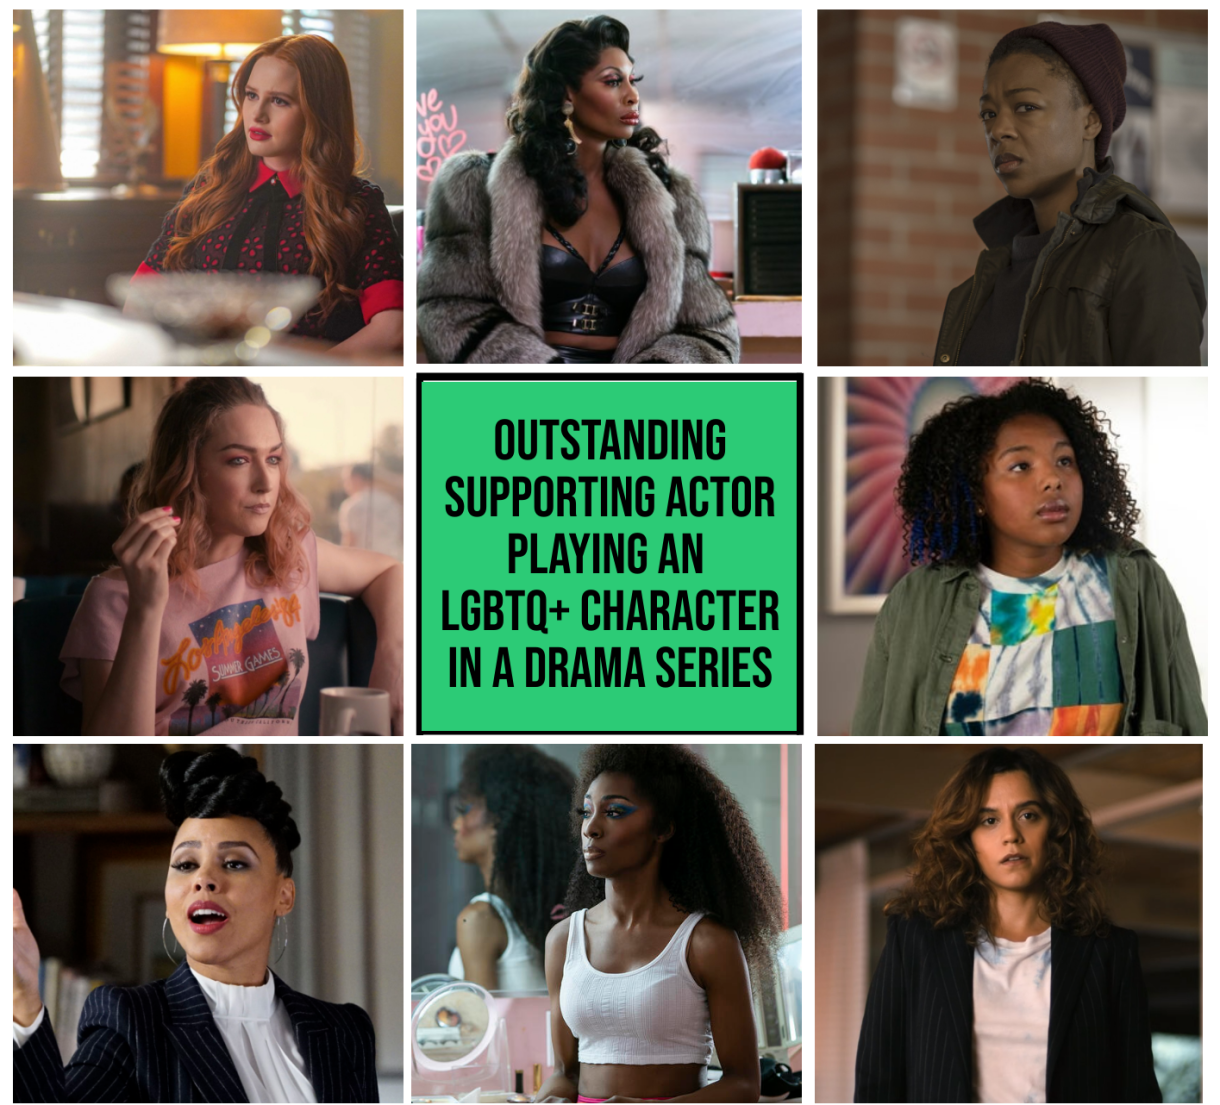 Top Row: Madelaine Petsch as Cheryl Blossom, Riverdale (The CW) // Dominique Jackson as Electra, Pose (FX) // Samira Wiley as Moira, The Handmaid's Tale (Hulu)  
Middle Row: Jamie Clayton as Tess, The L Word: Generation Q (Showtime) box reading "Outstanding Supporting Actor Playing an LGBTQ+ Character in a Drama" // Jordan Hull as Angelica, The L Word: Generation Q (Showtime) 
Bottom Row: Amirah Vann as Tegan Price, How to Get Away With Murder (ABC) // Angelica Ross as Candy, Pose (FX) // Sepideh Moafi as Gigi, The L Word: Generation Q (Showtime)